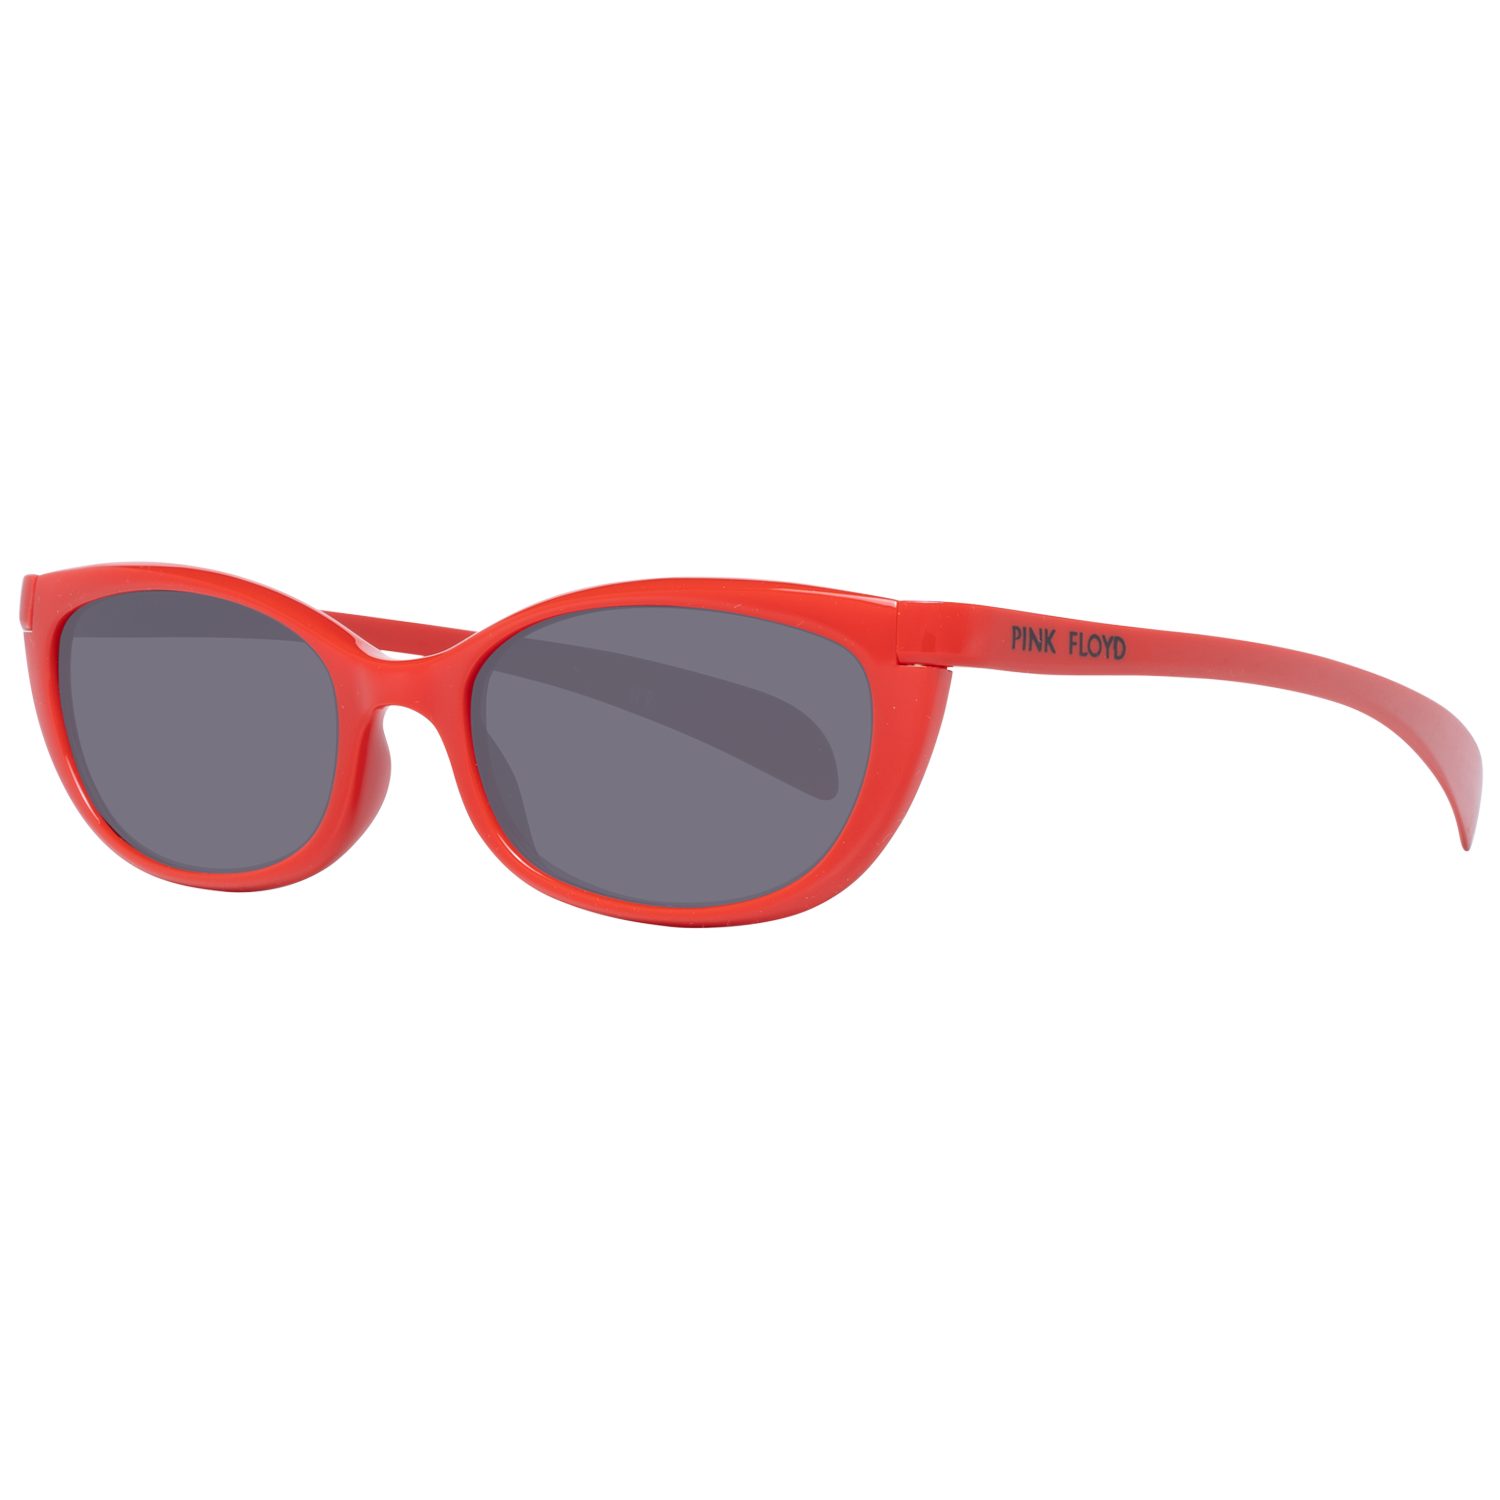 Try Cover Change Sonnenbrille TS502 5004